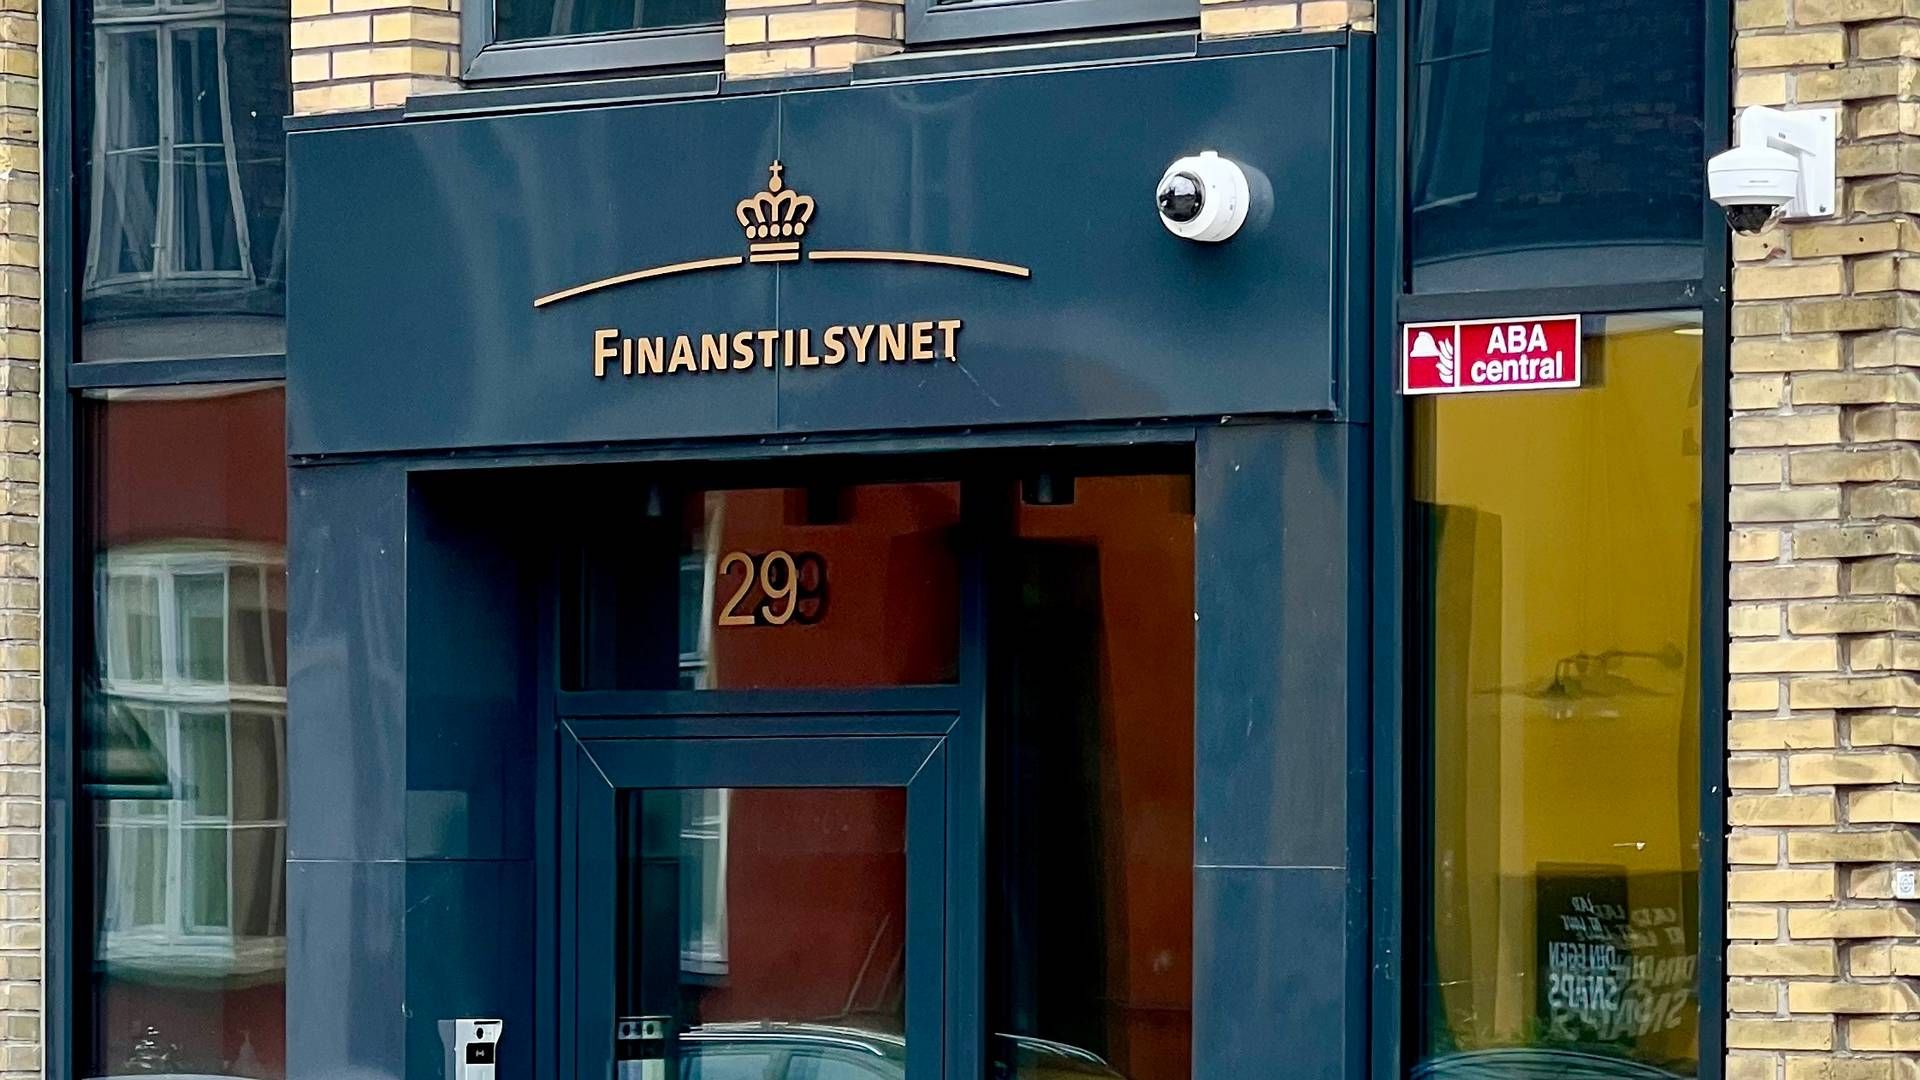 The Danish Financial Supervisory Authority attends to the financial regulation in Denmark. | Photo: Finanstilsynet - Pr